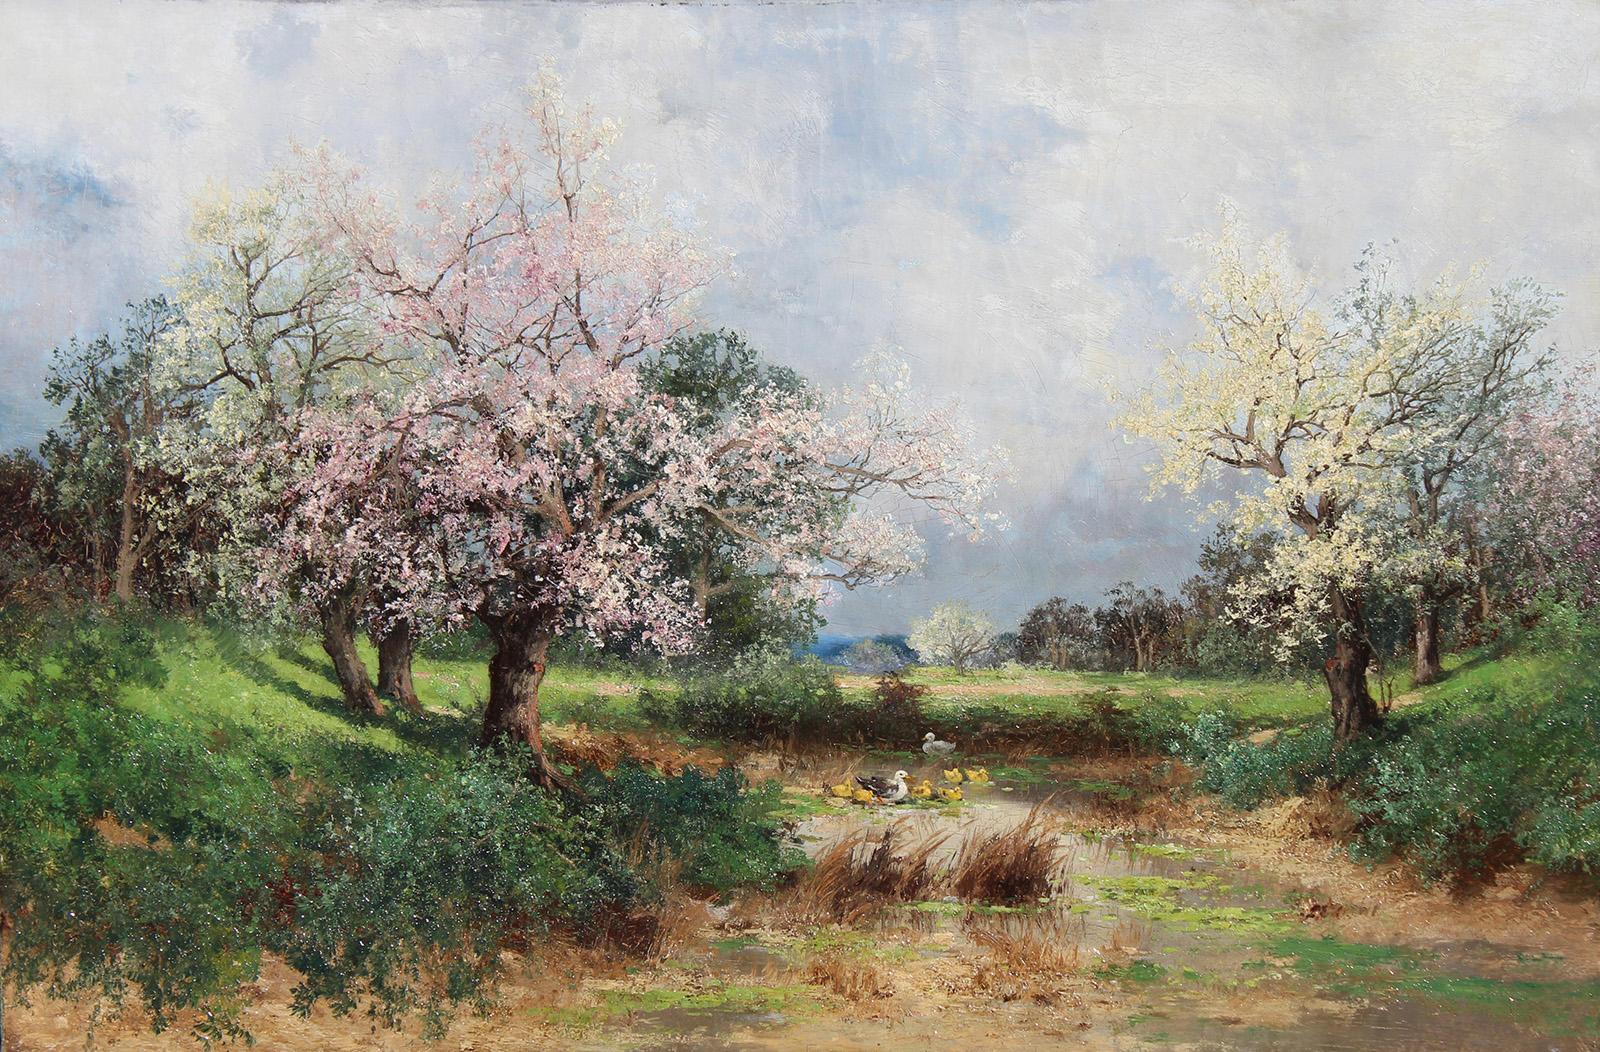 Landscape with Blossoming Trees and Ducks by Arthur Parton 1